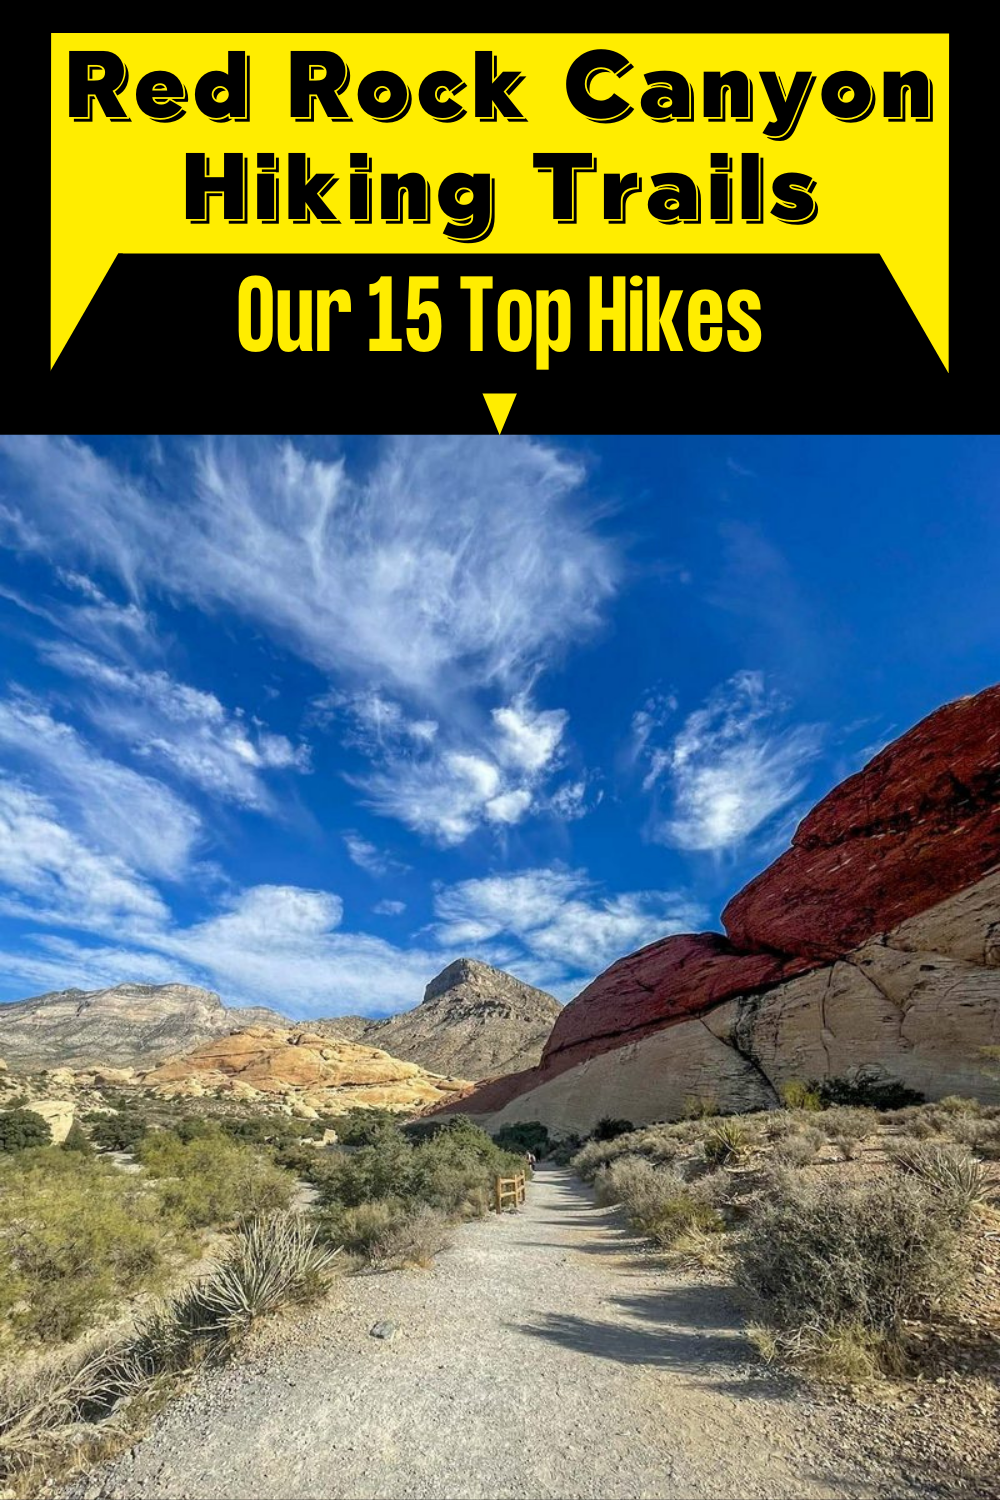 Red Rock Canyon Hiking Trails